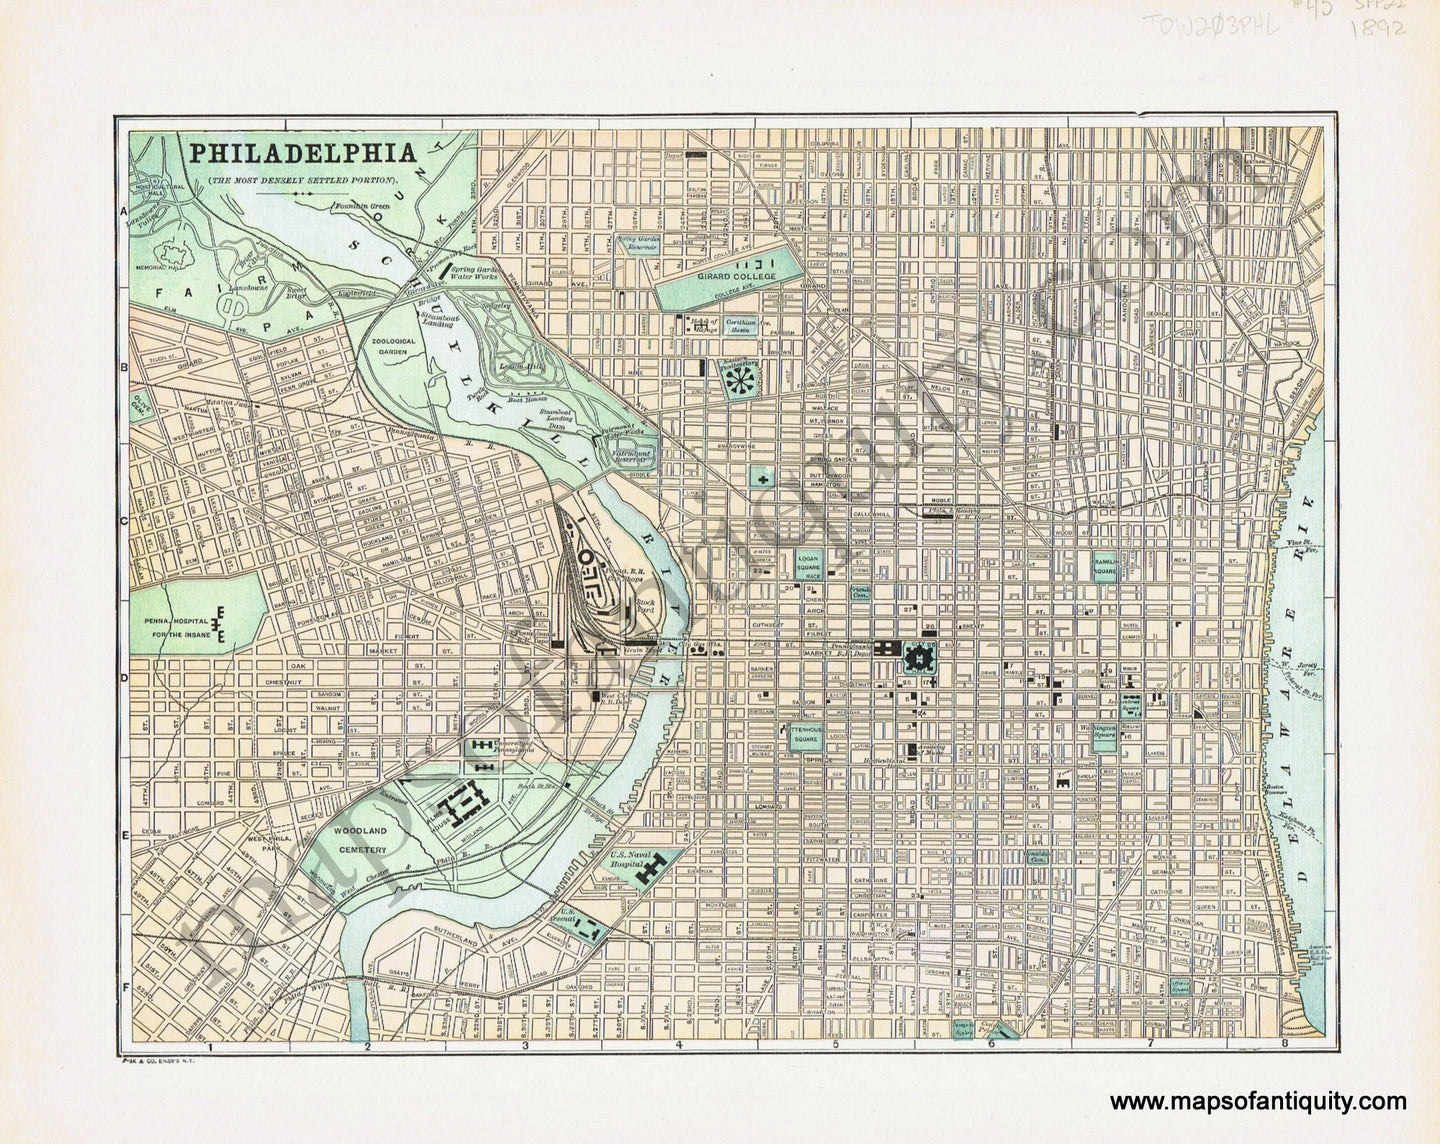 Antique-Printed-Color-Map-Philadelphia-(The-Most-Densely-Settled-Portion).--**********-Towns-and-Cities-Philadelphia-1892-Hunt-&-Eaton-Maps-Of-Antiquity